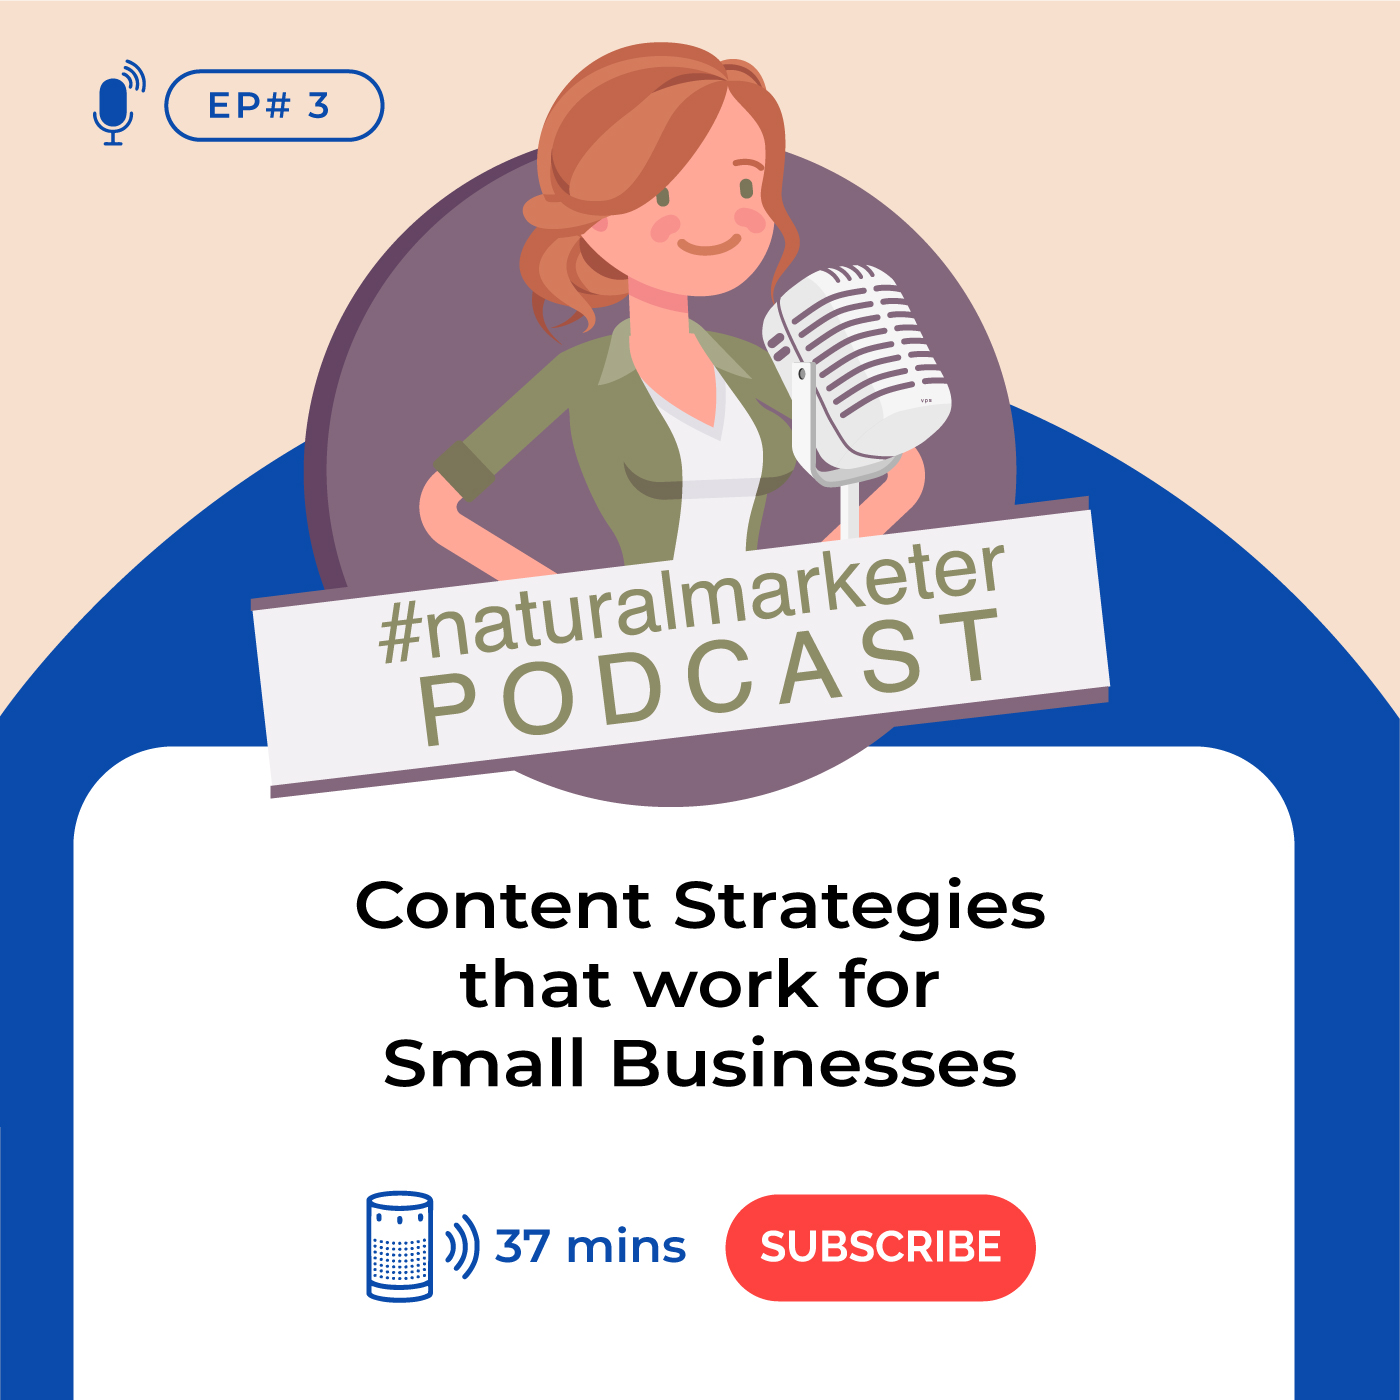 Episode 3: Content Strategies that work for Small Businesses